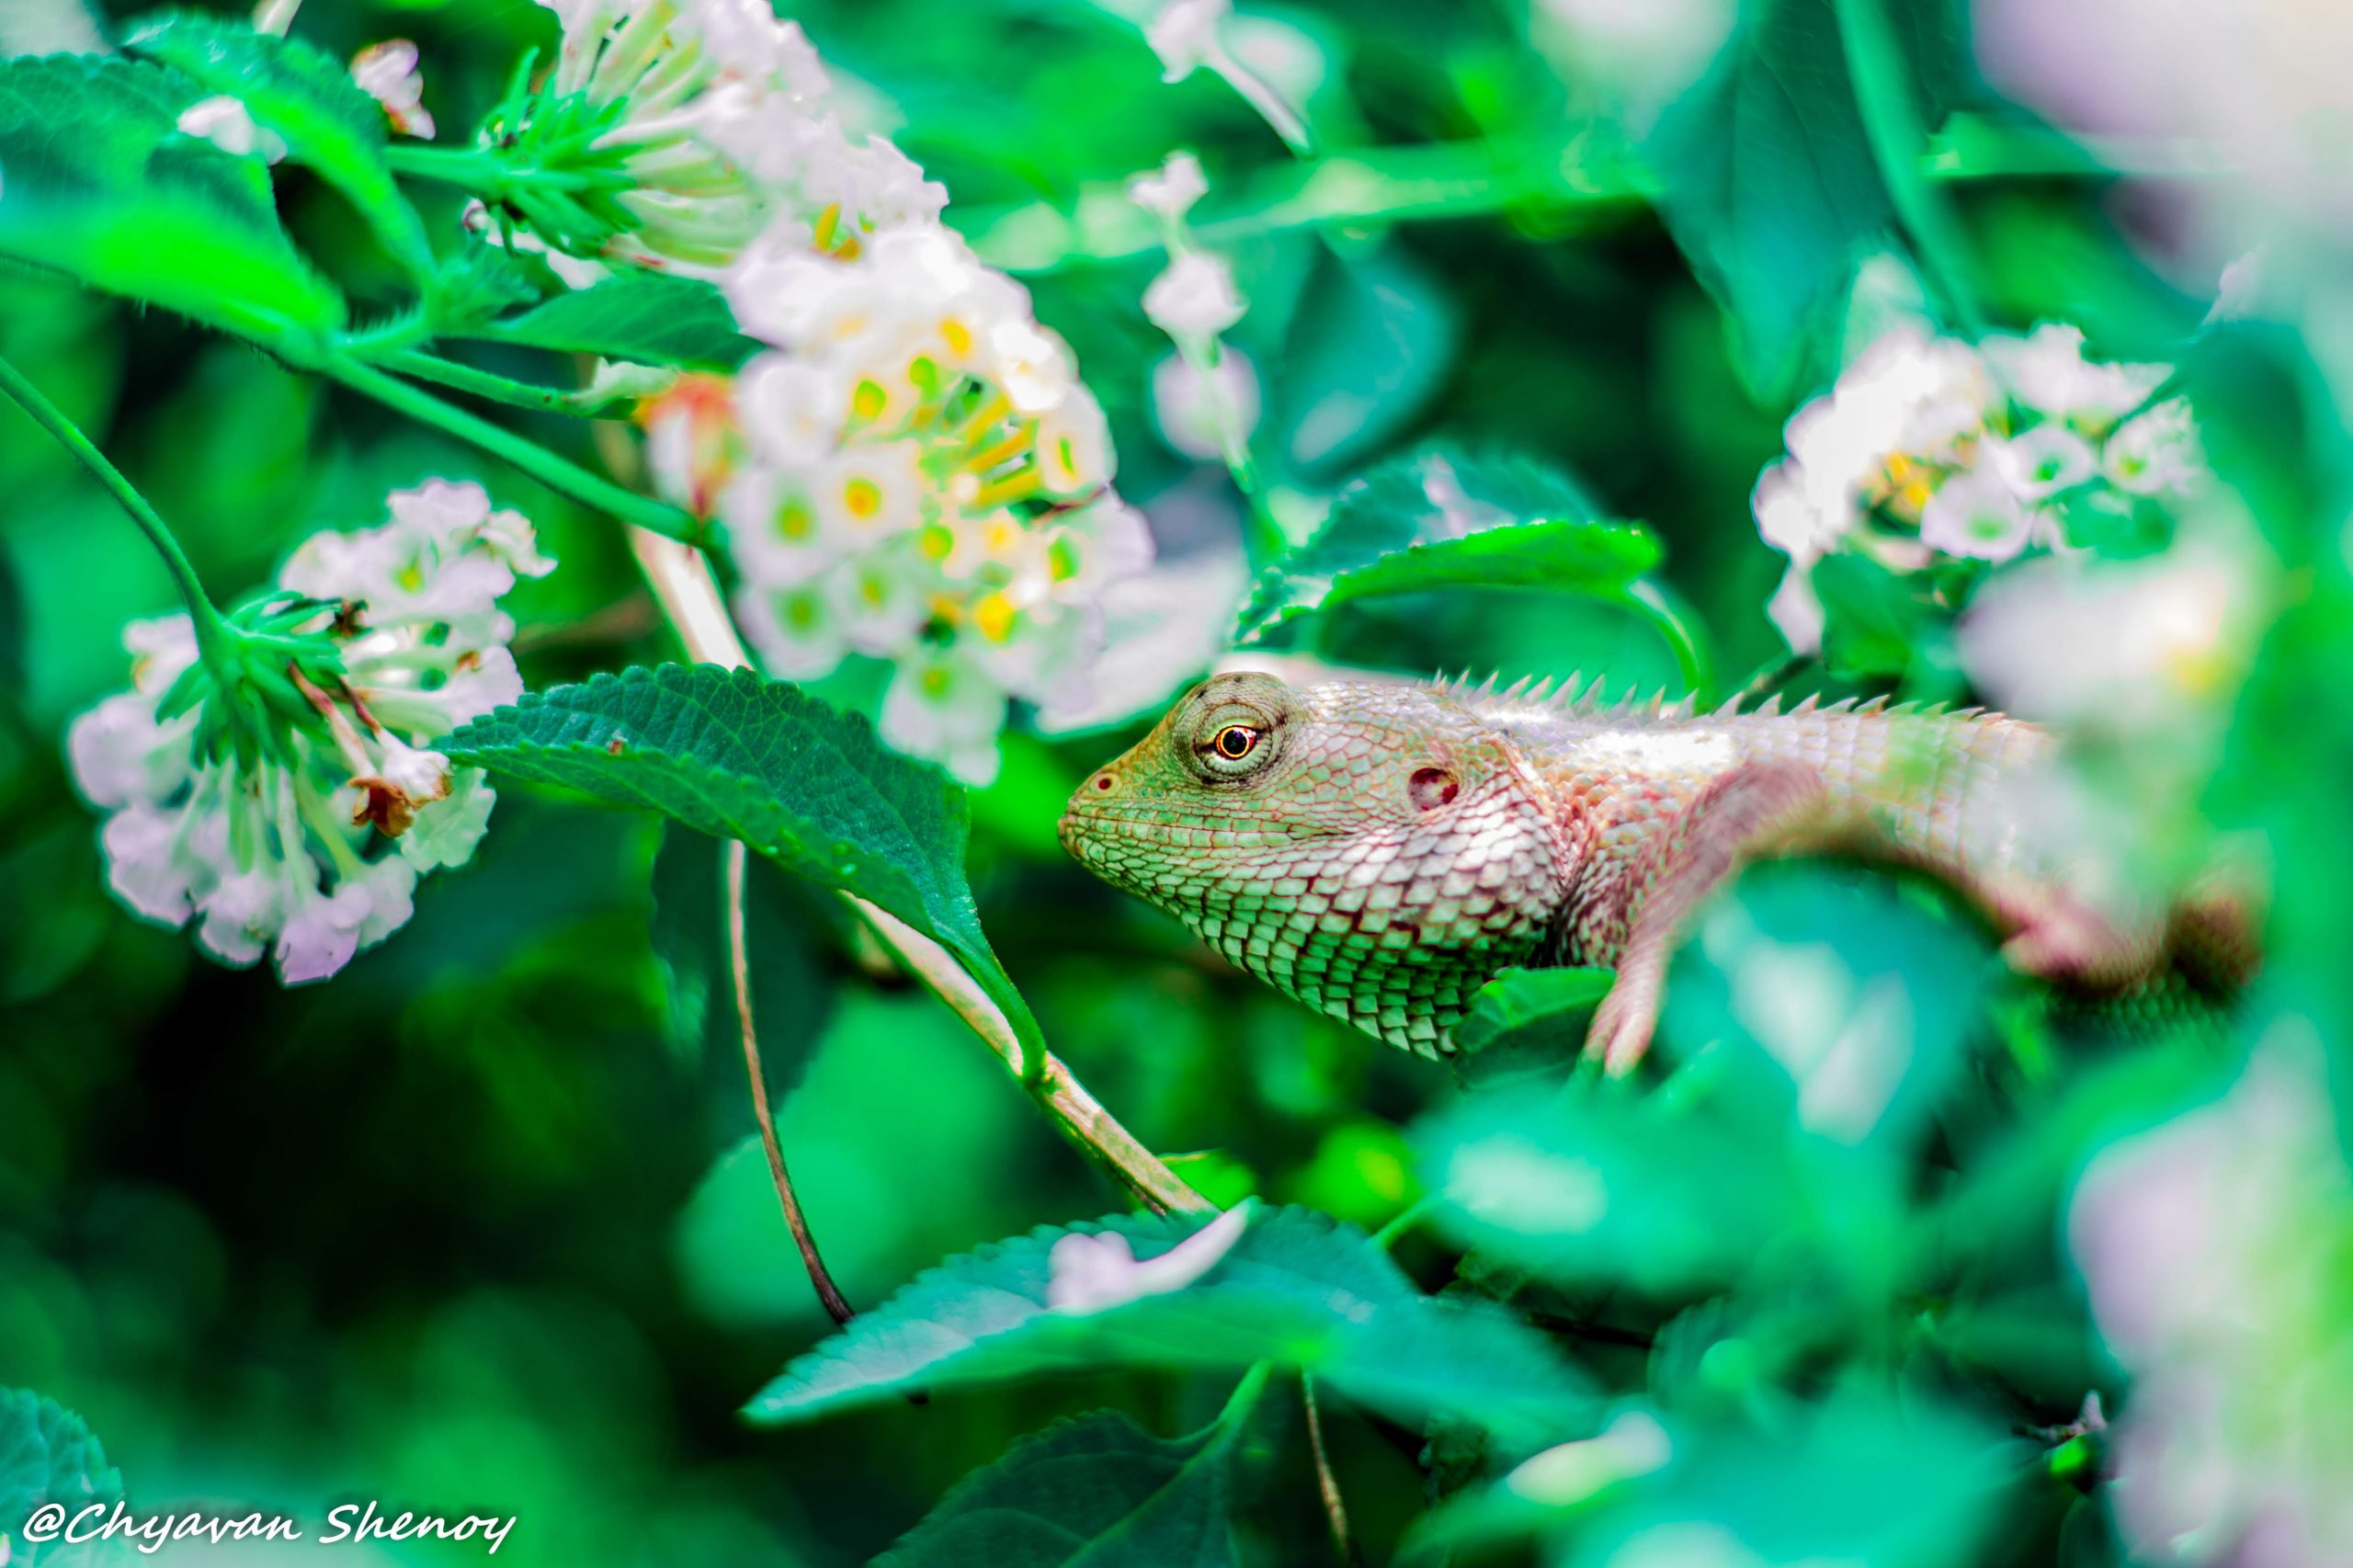 Lizard and flowers